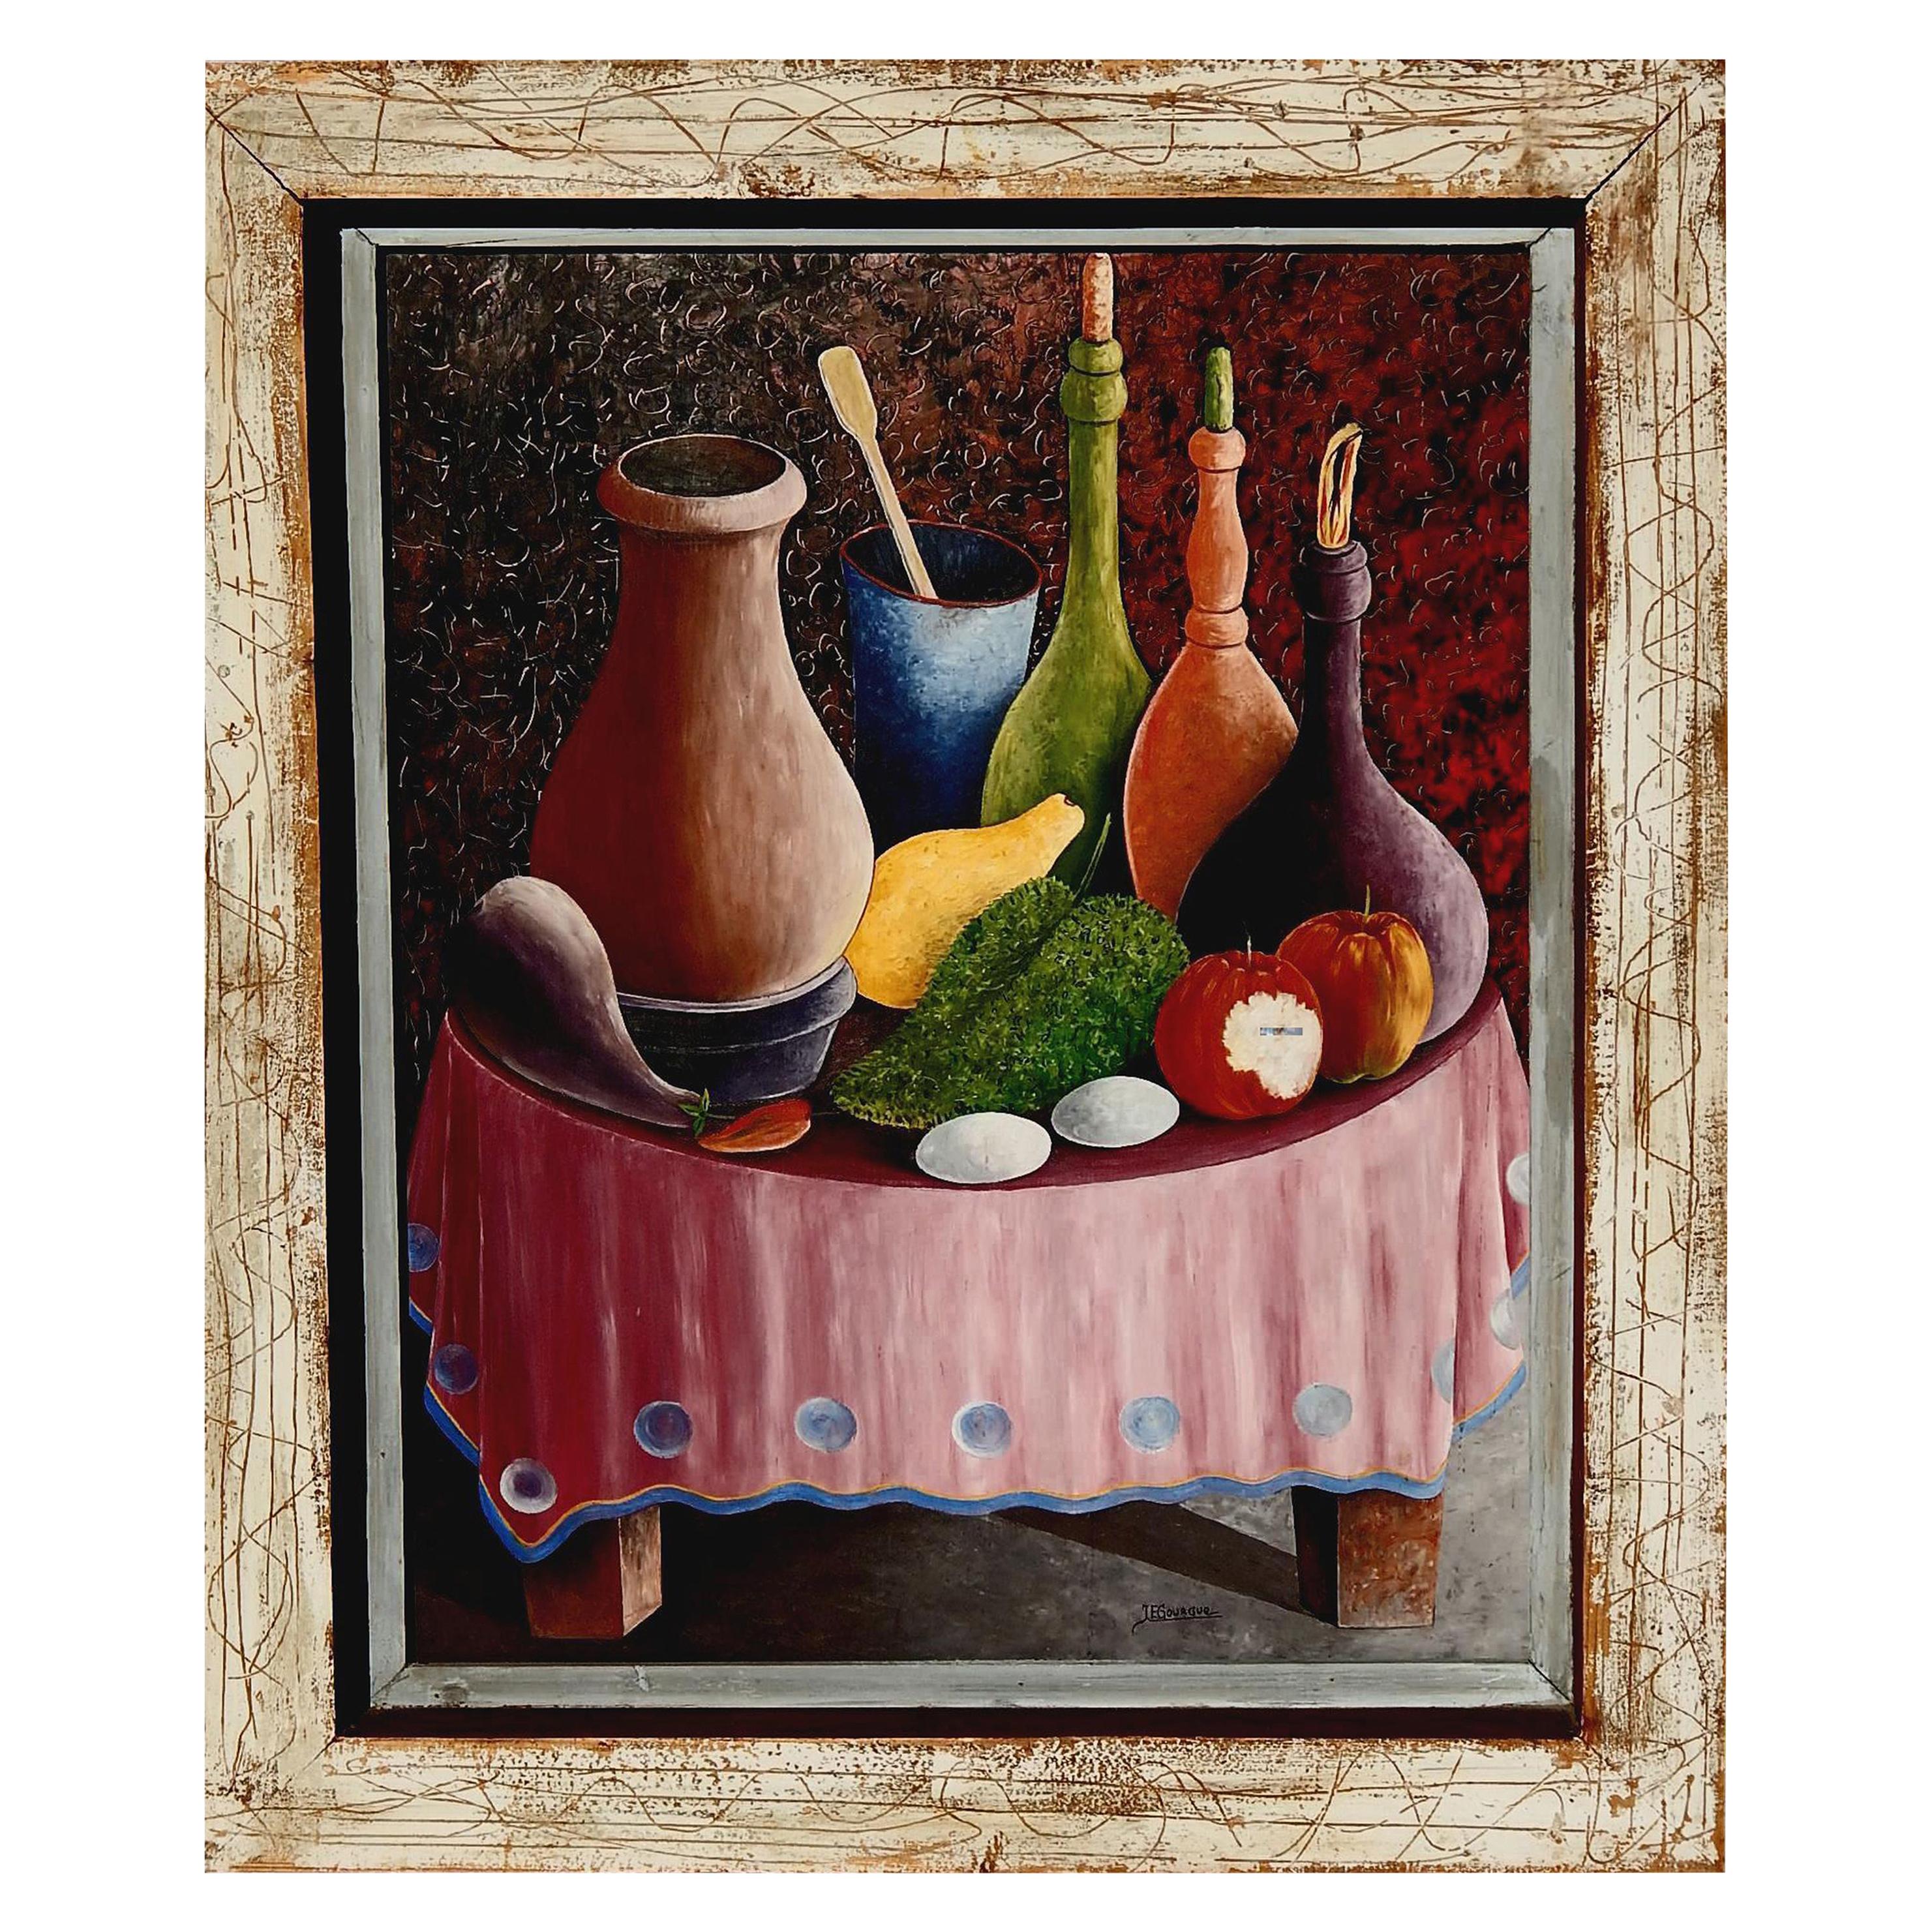 Jacques Gourgue Haitian Painter Oil on Board, Surreal Still Life